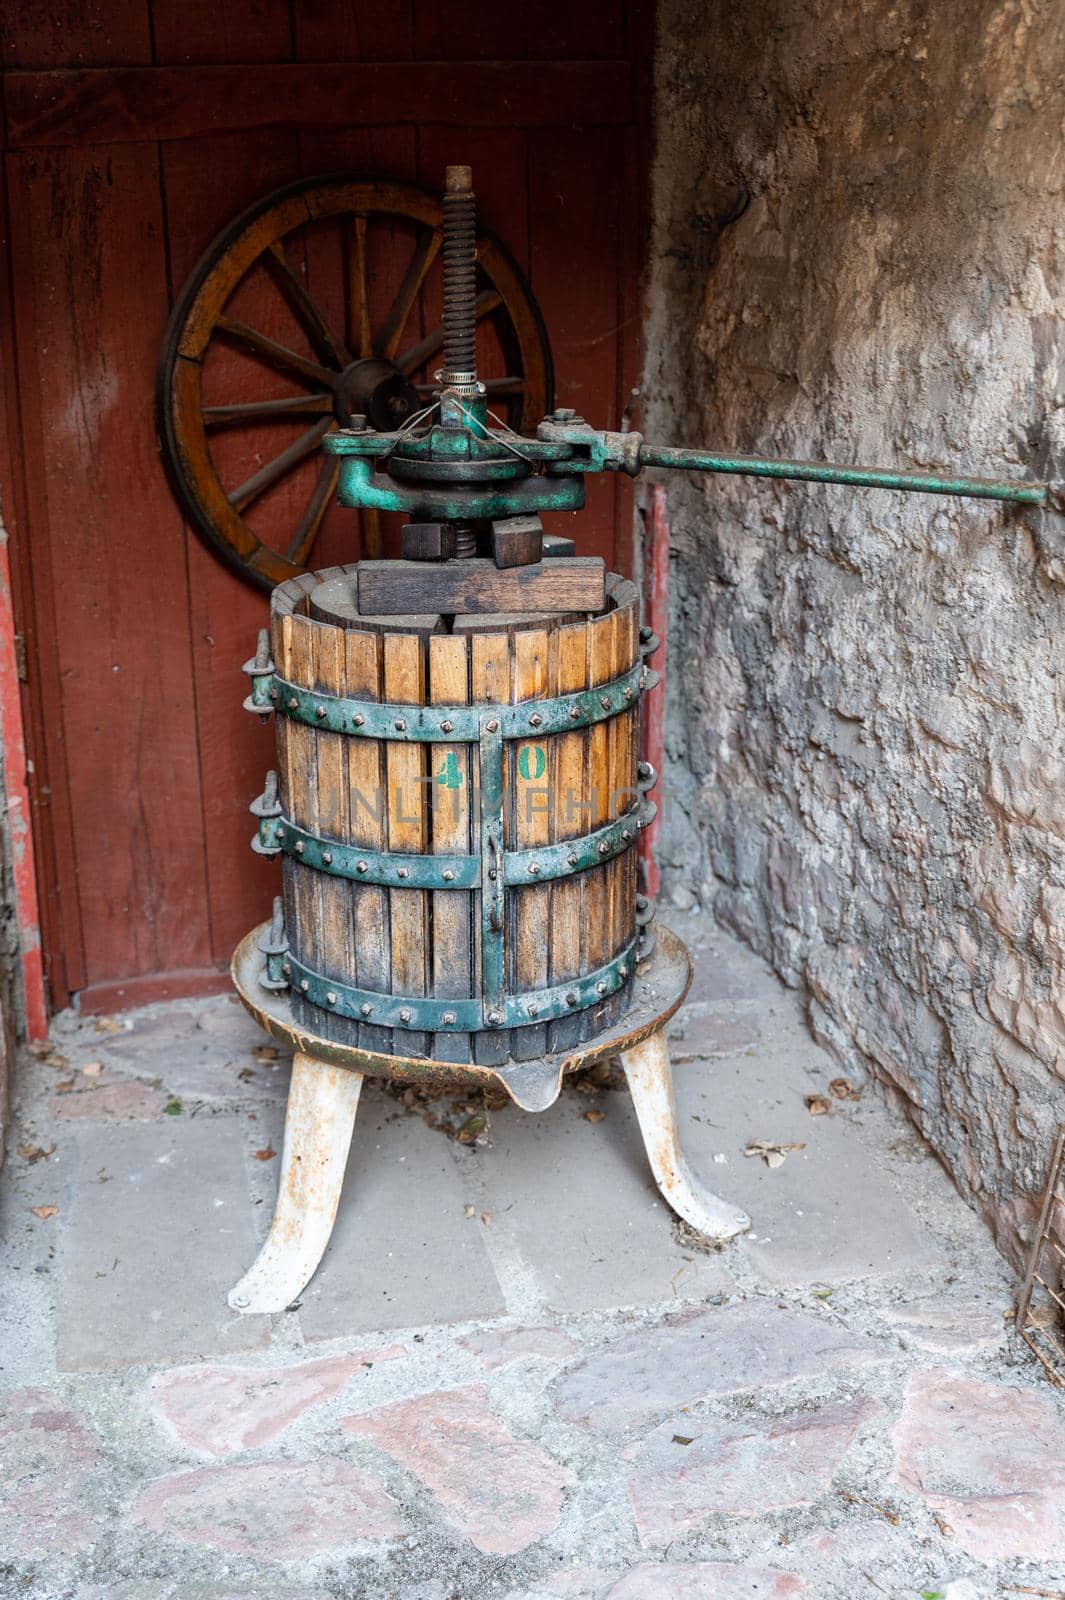 ancient press for crushing grapes for the production of wine